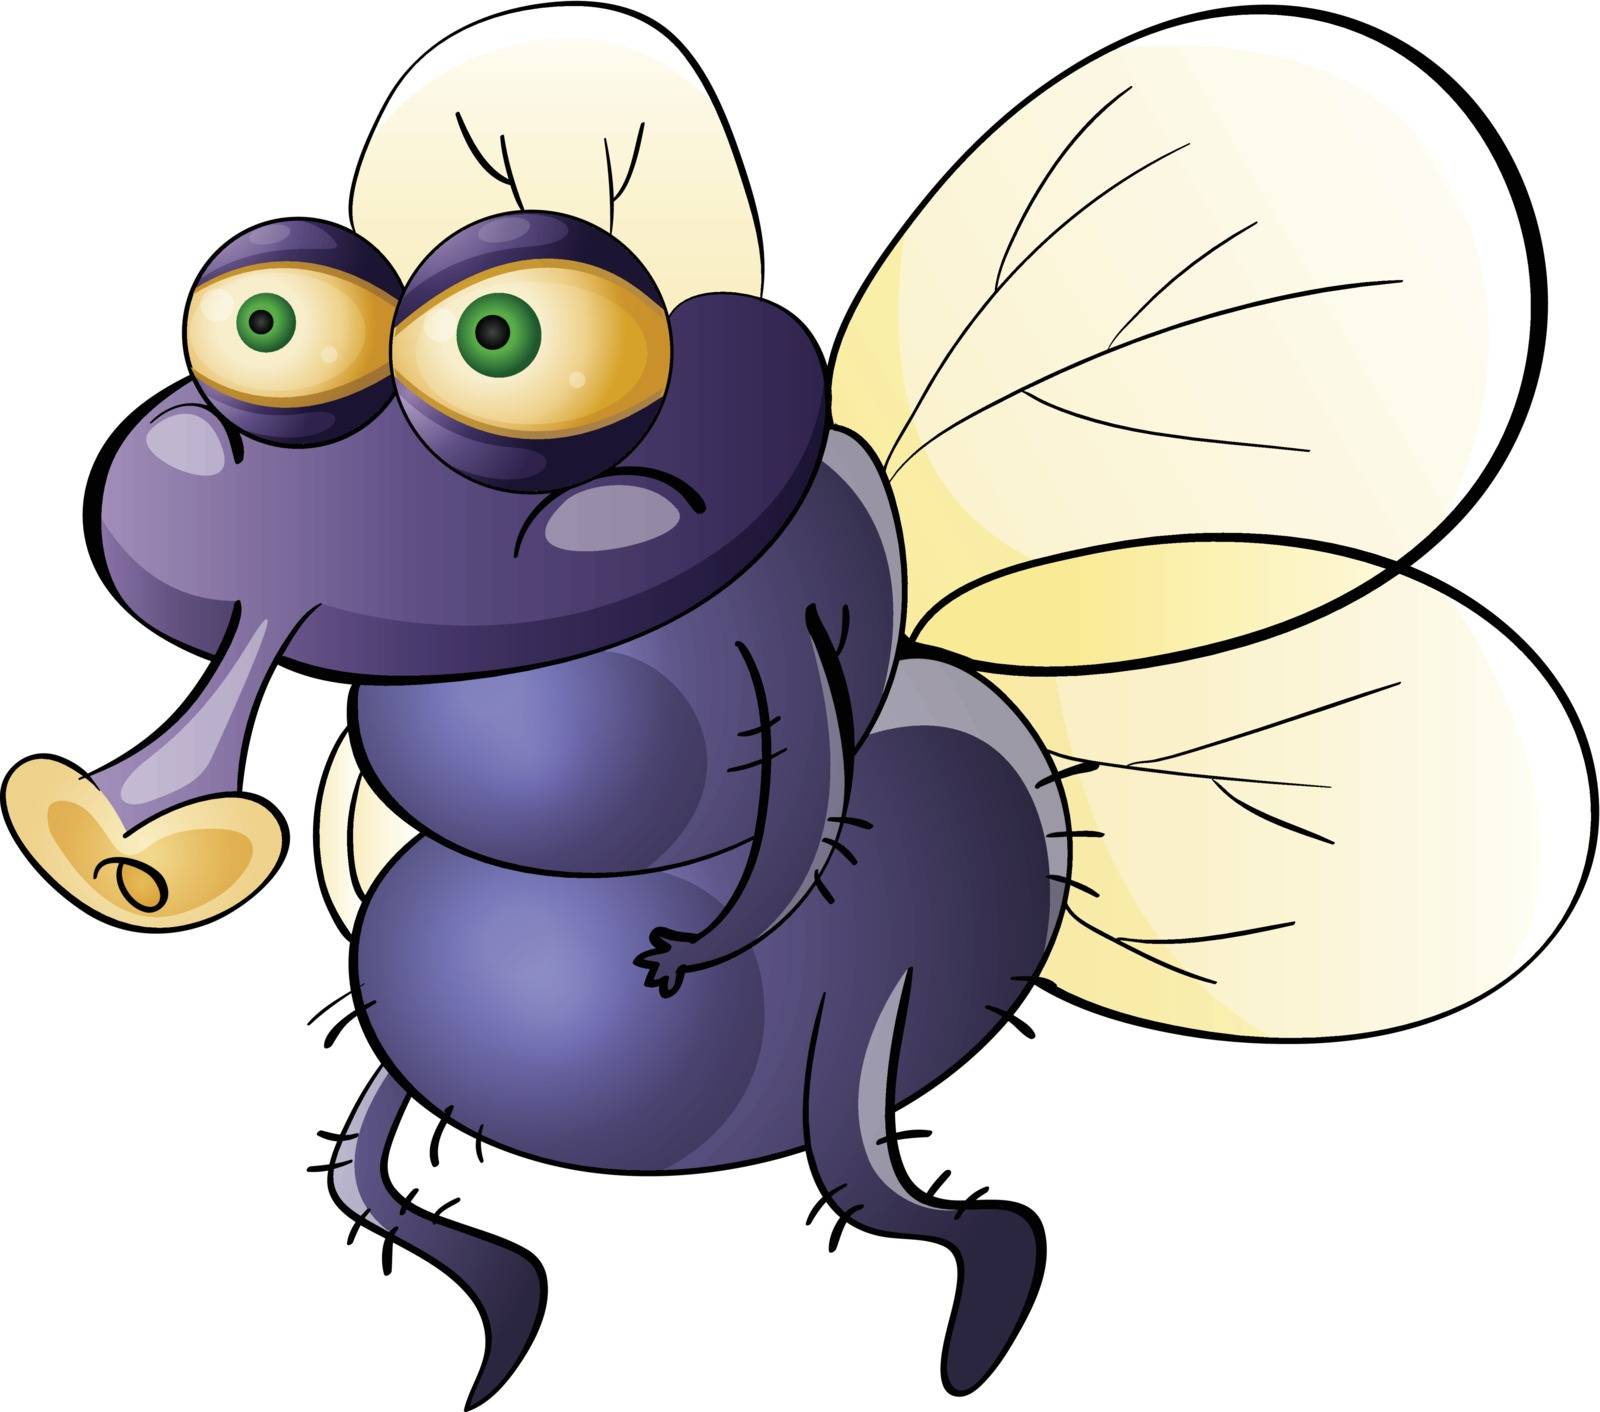 Illustration of a dirty housefly